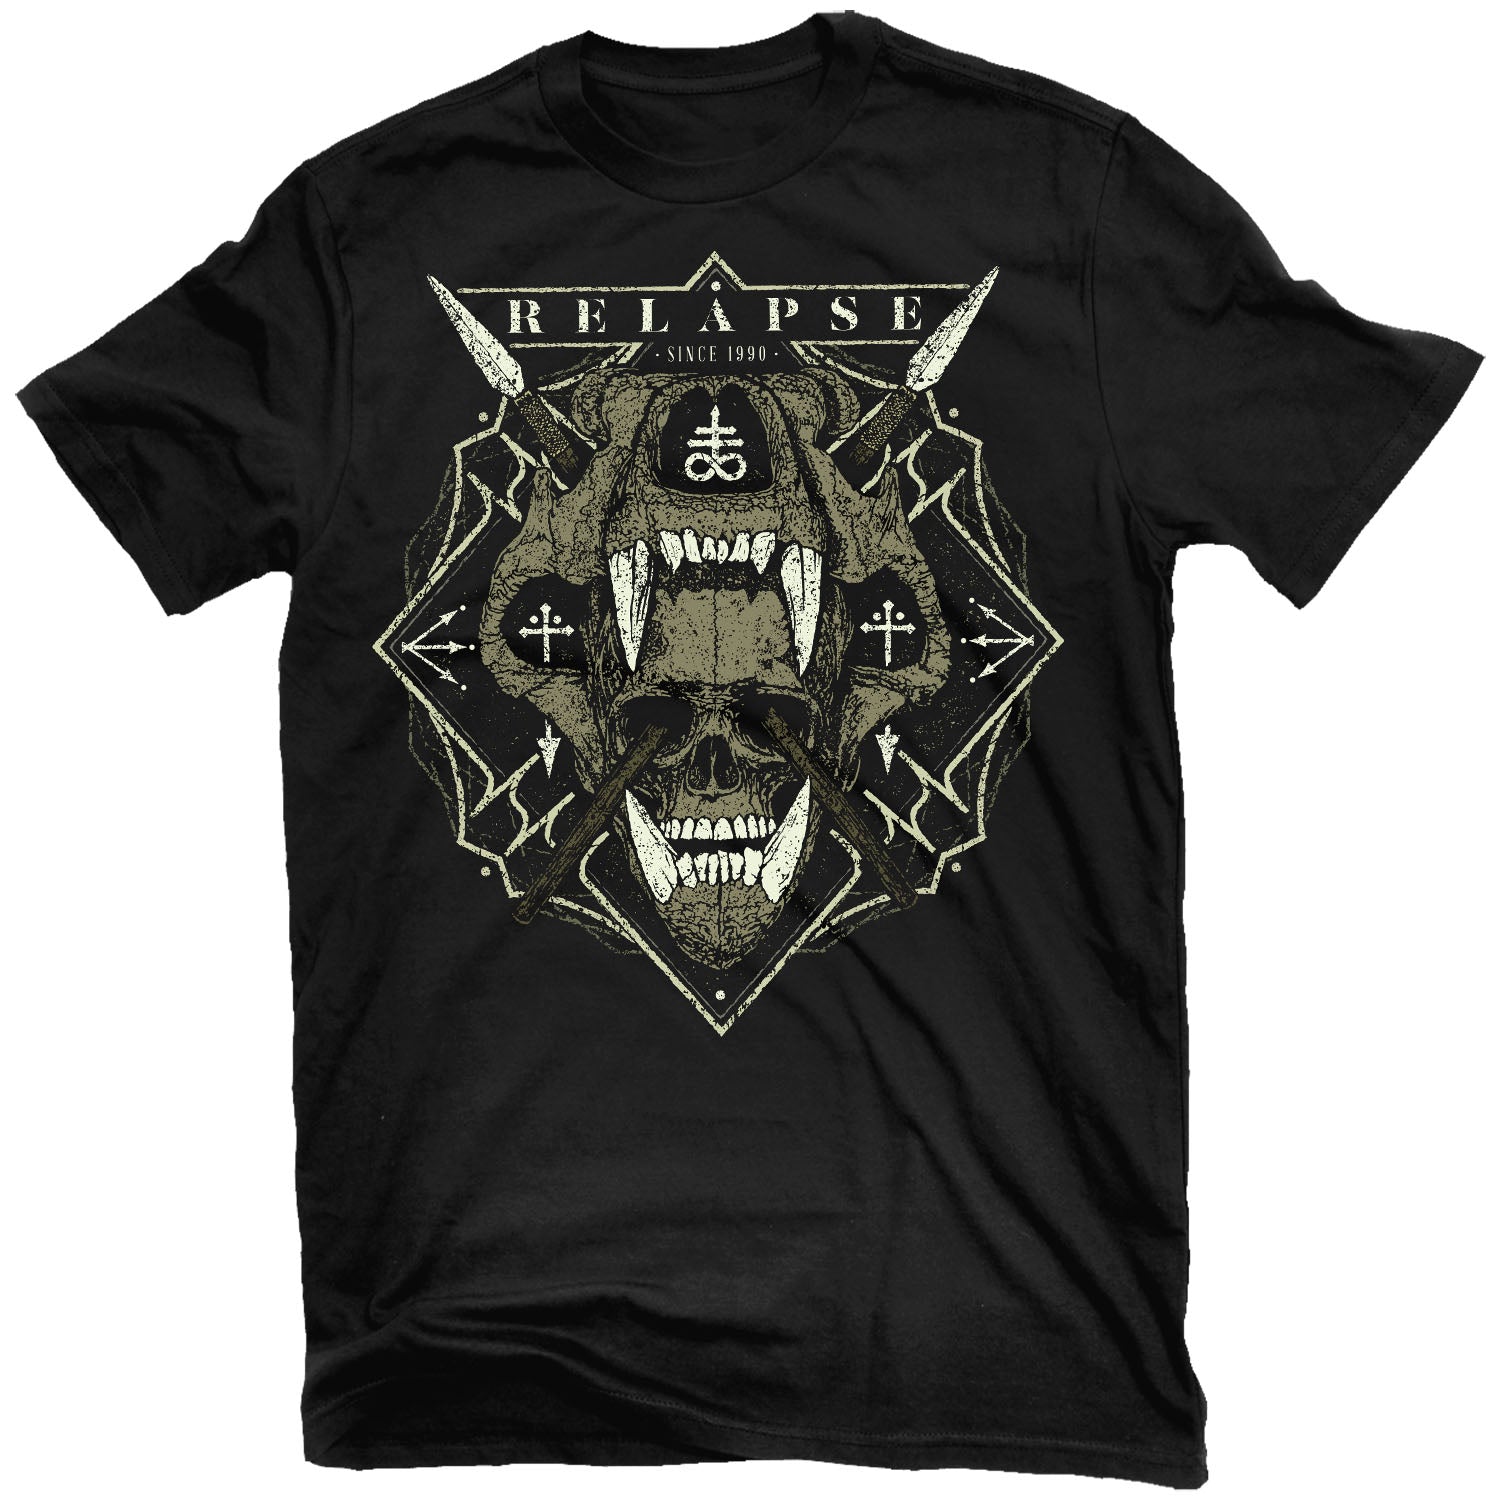 Relapse Records "Alchemy" T-Shirt